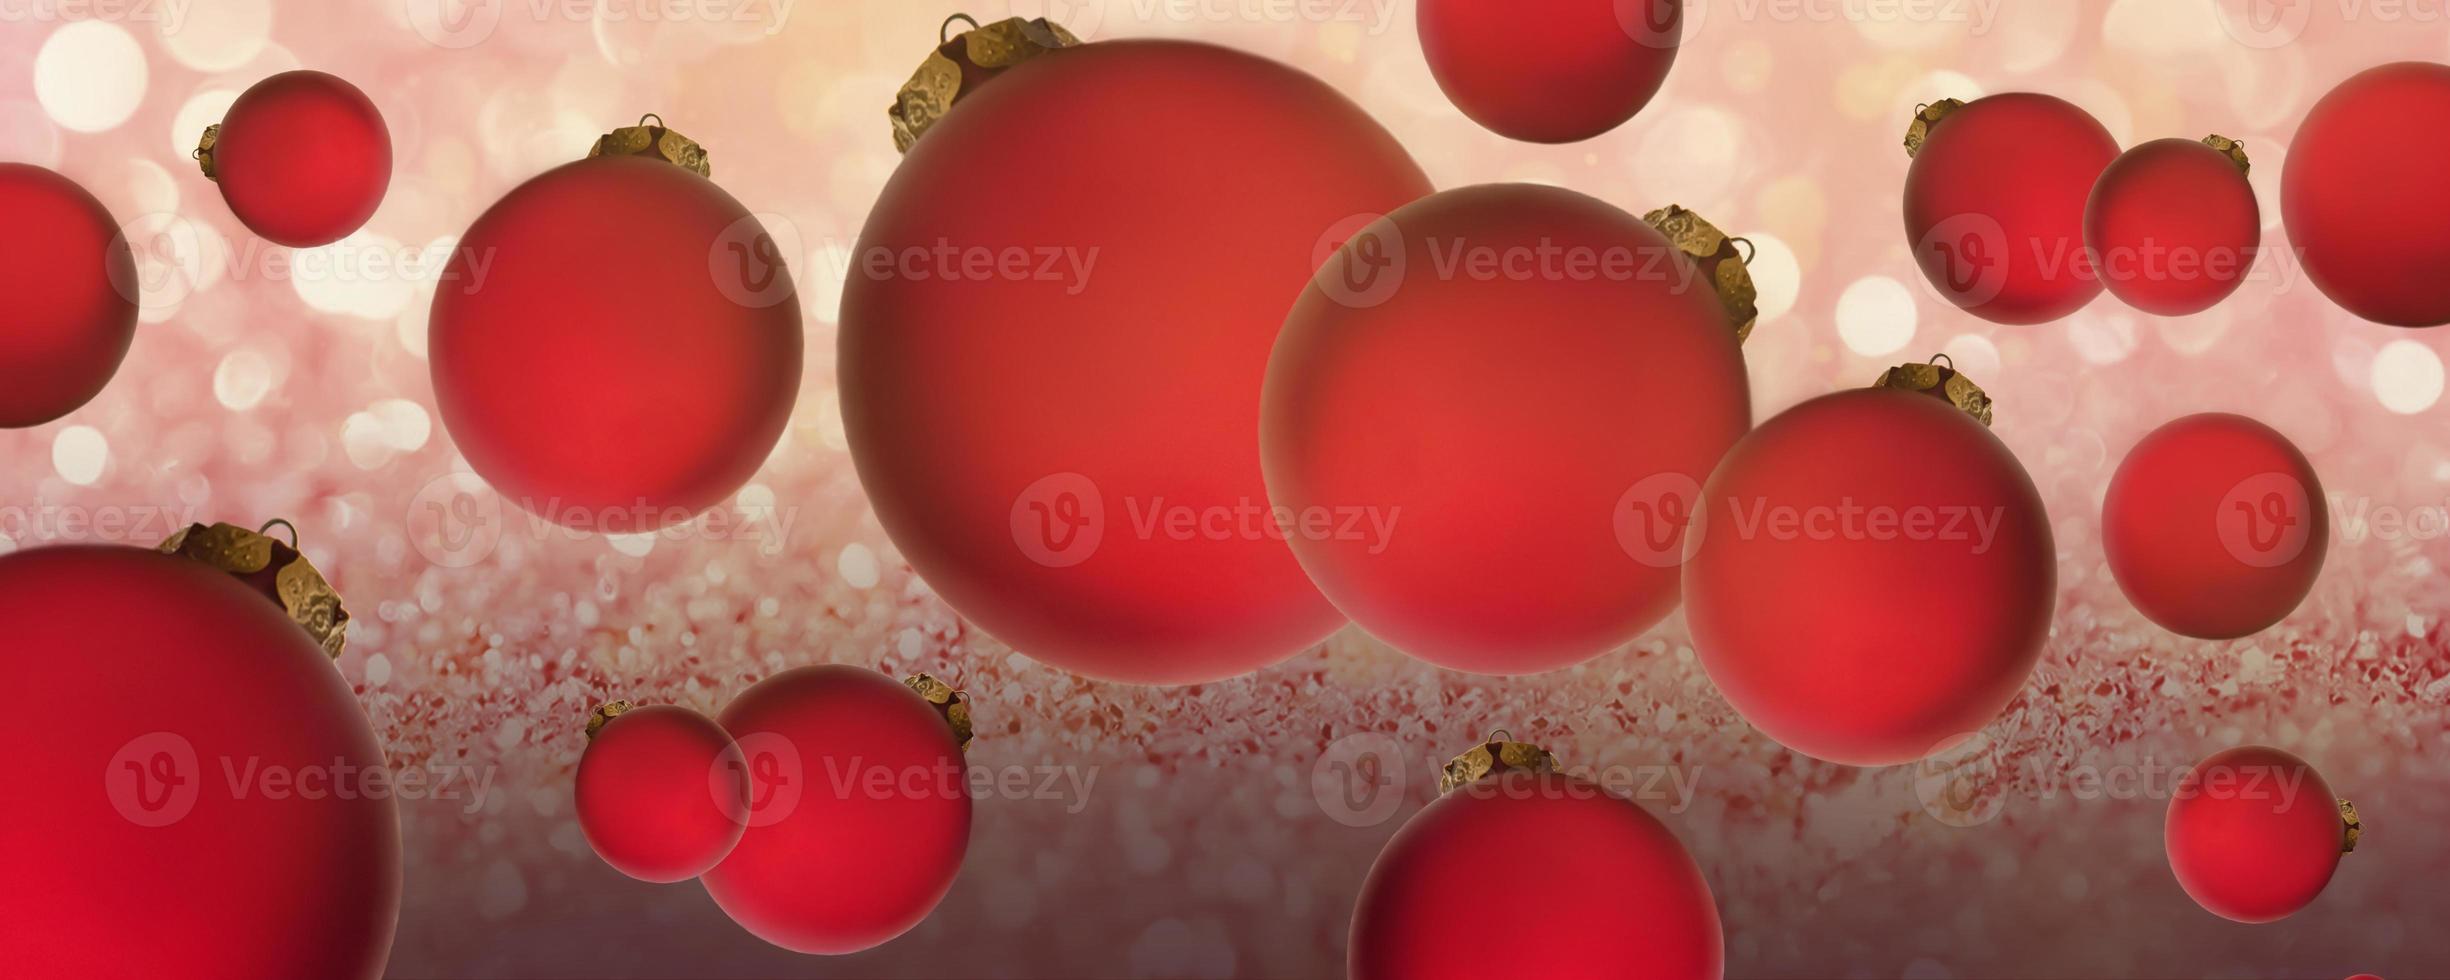 Christmas banner. Red balls on a shiny background. Christmas, holiday, greetings. Background for advertising and business. photo